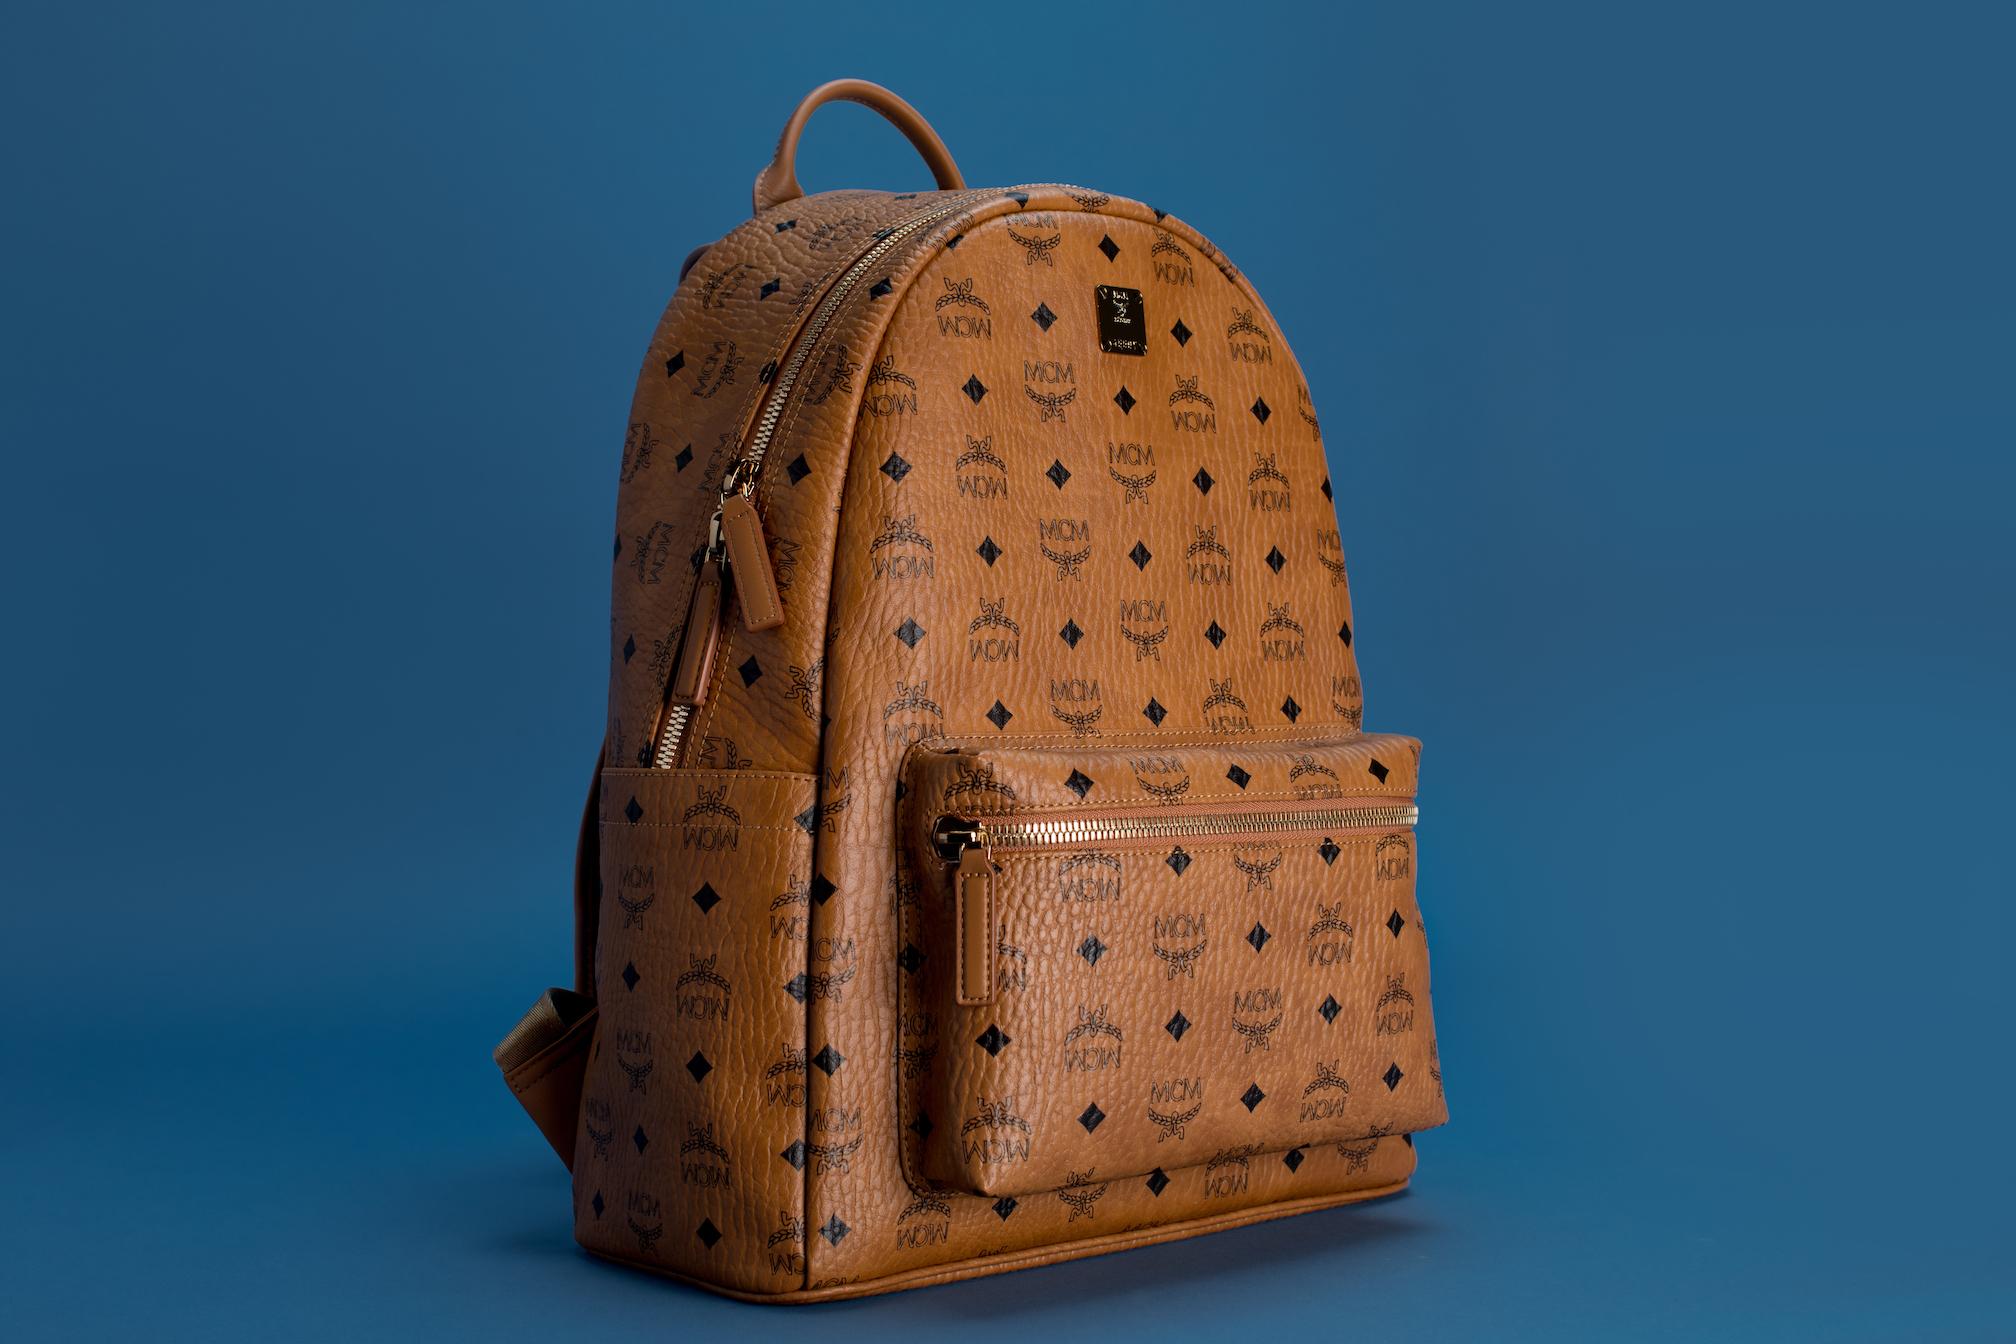 Virgil's Louis Vuitton Pre-Spring 2020 Collection is Here - StockX News